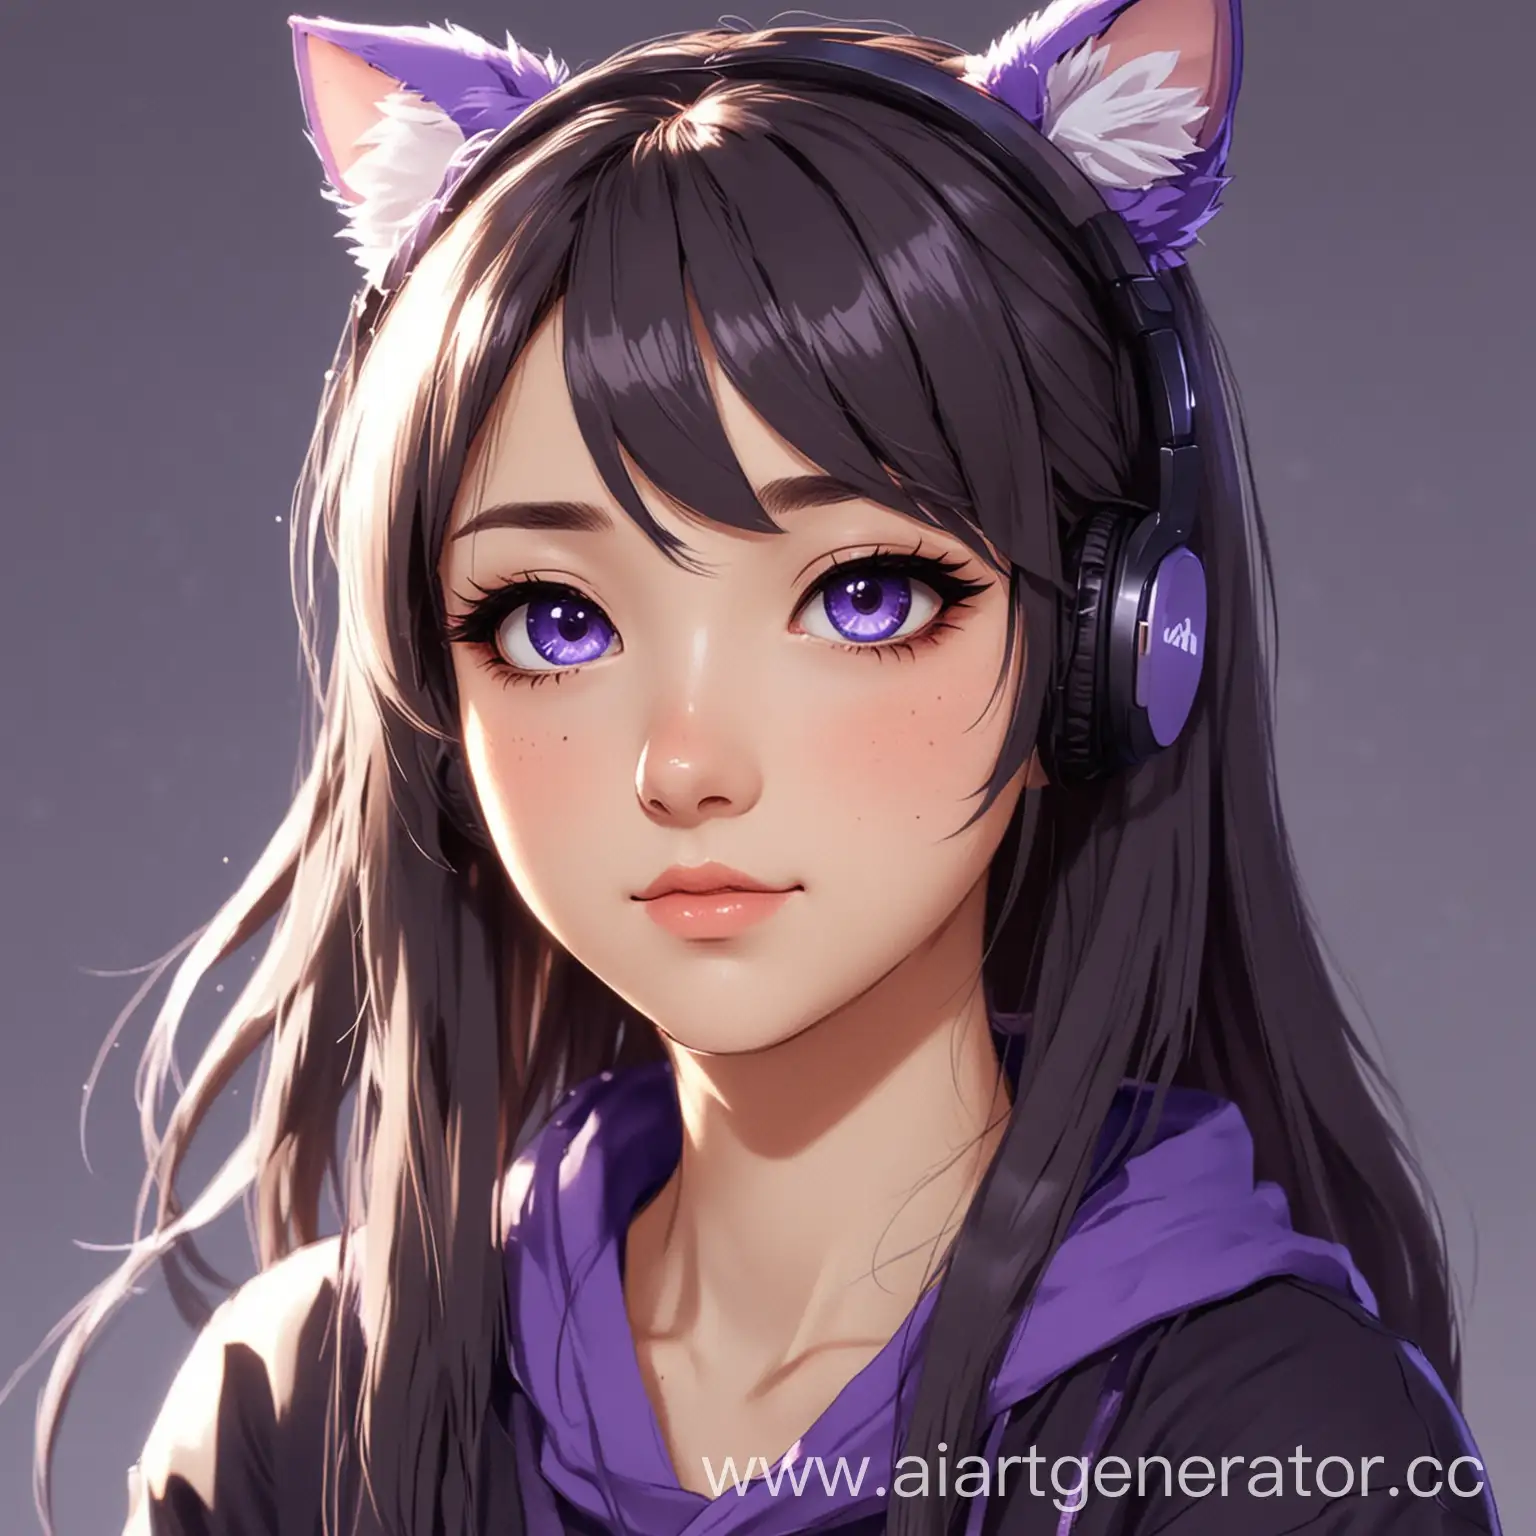 Avatar for twitch, anime girl